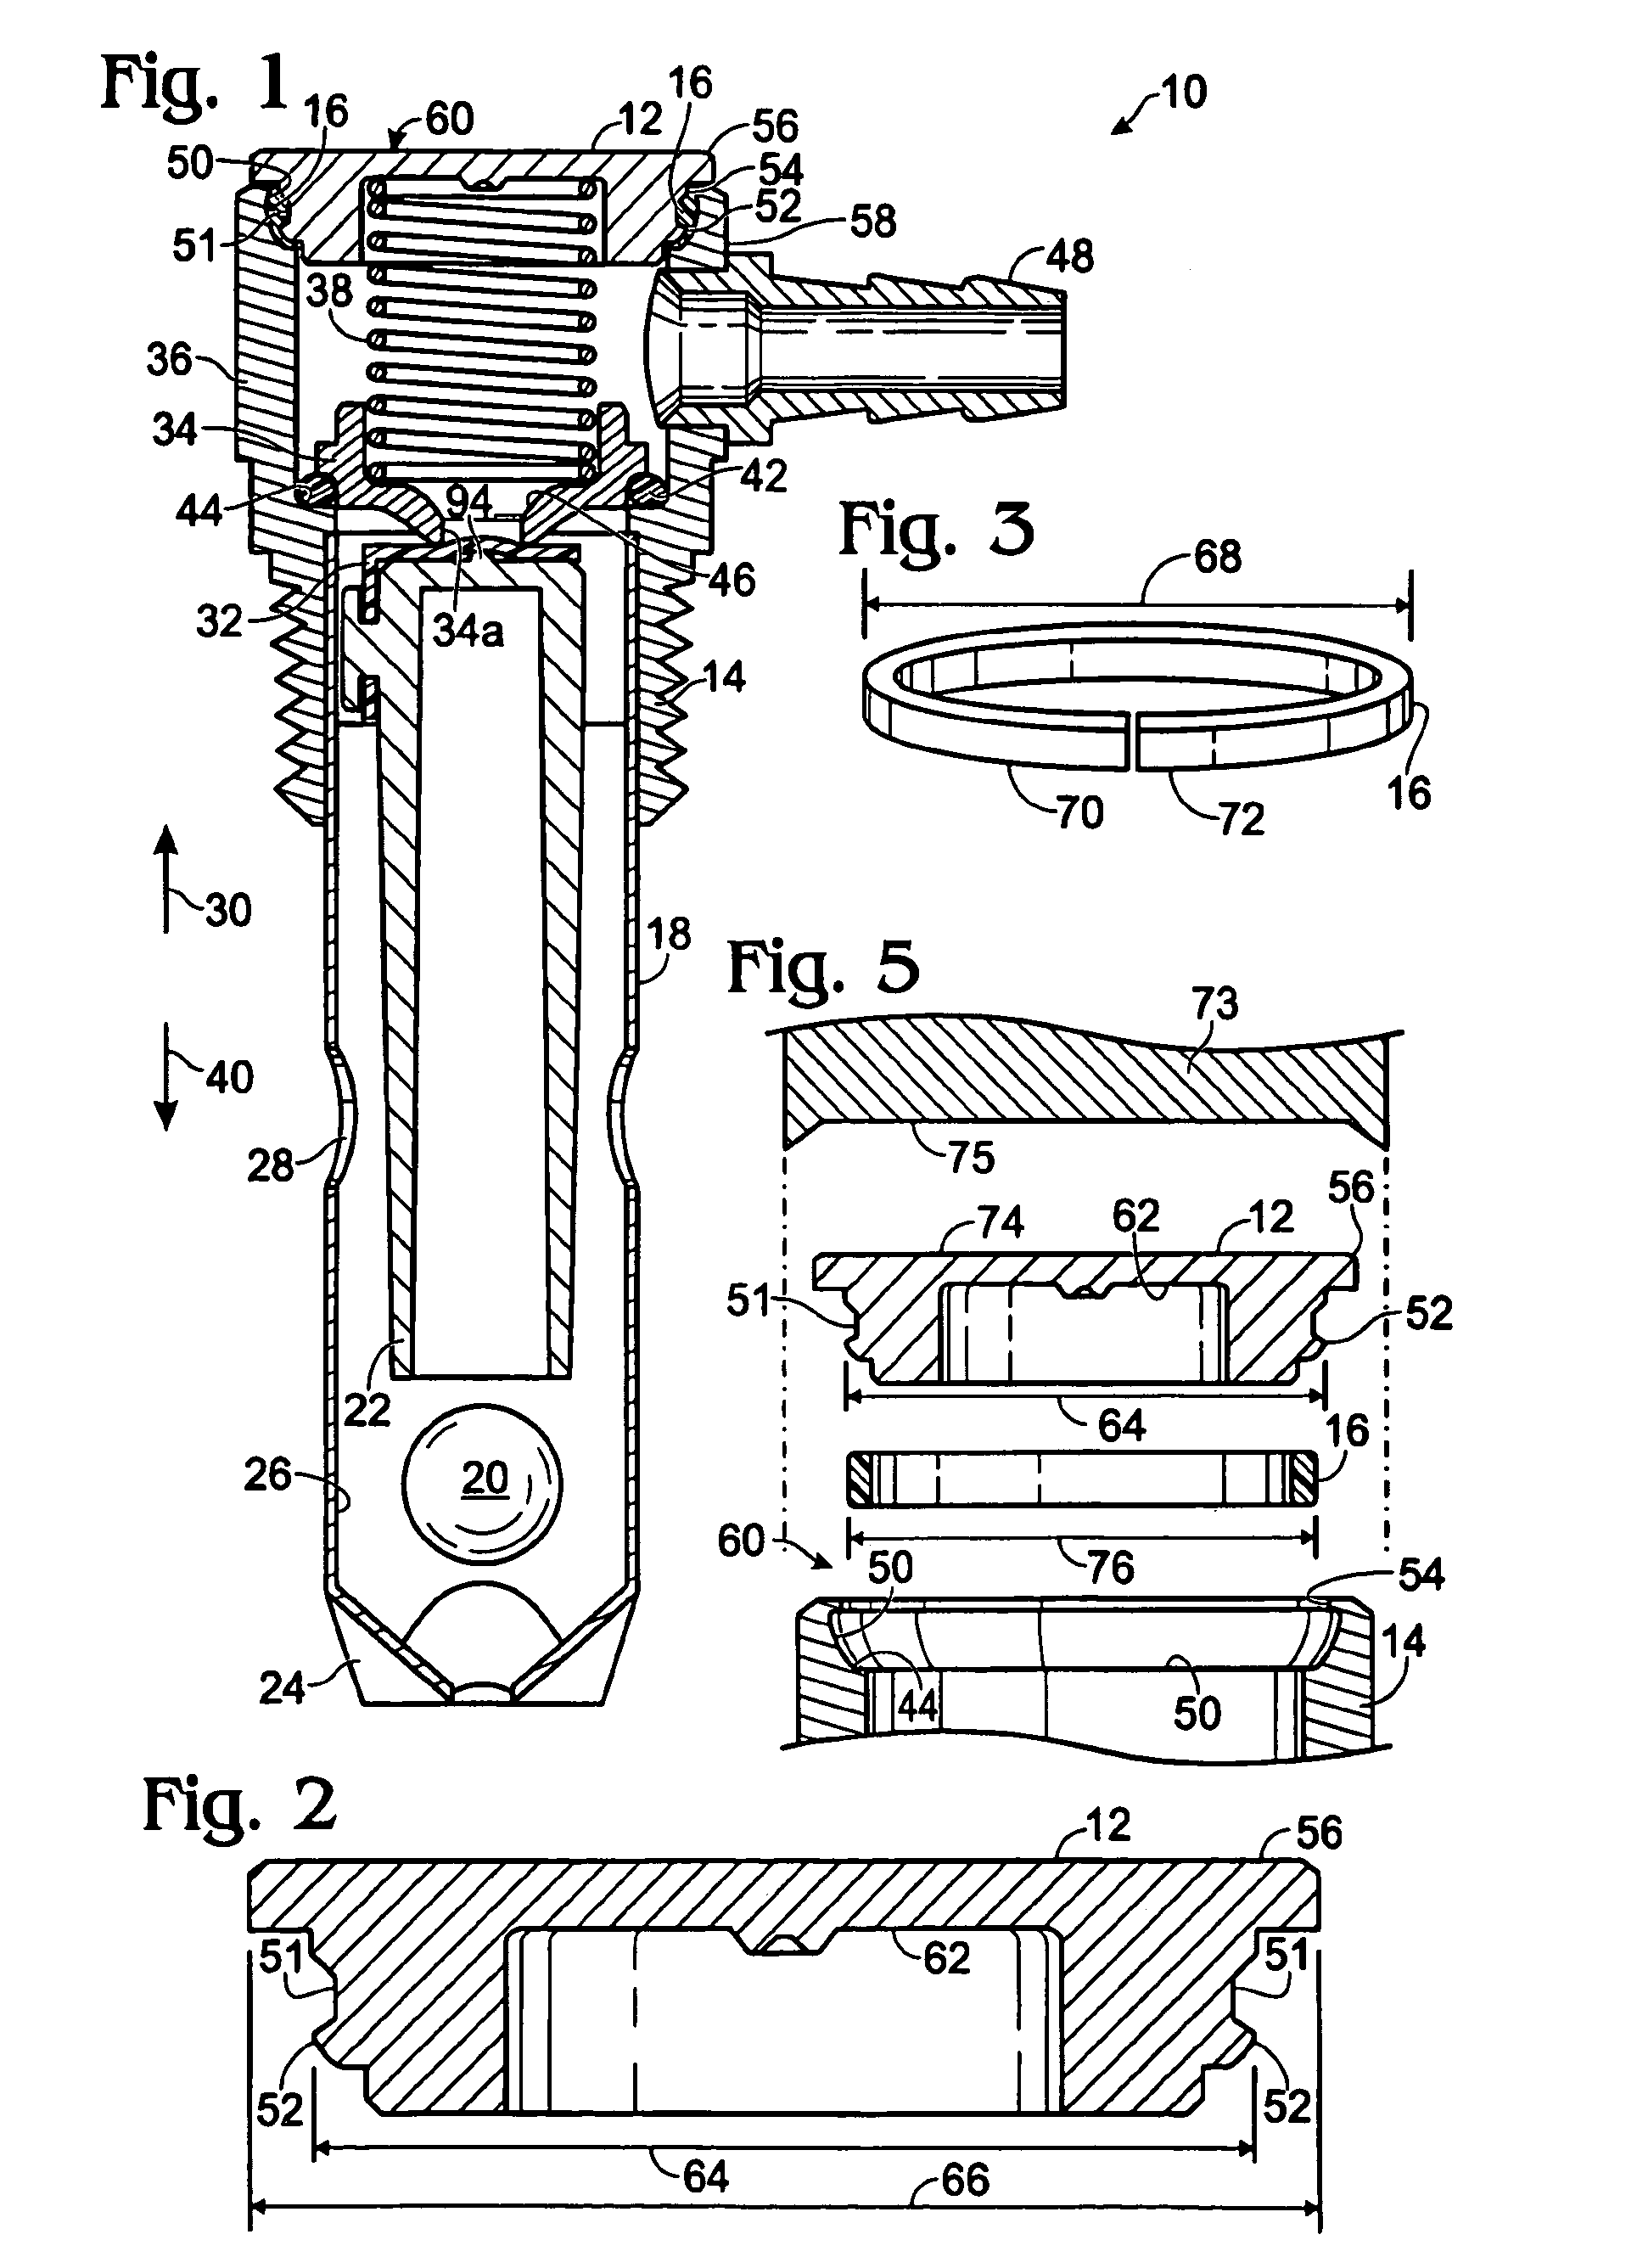 Thermal relief vent and method of manufacturing the same